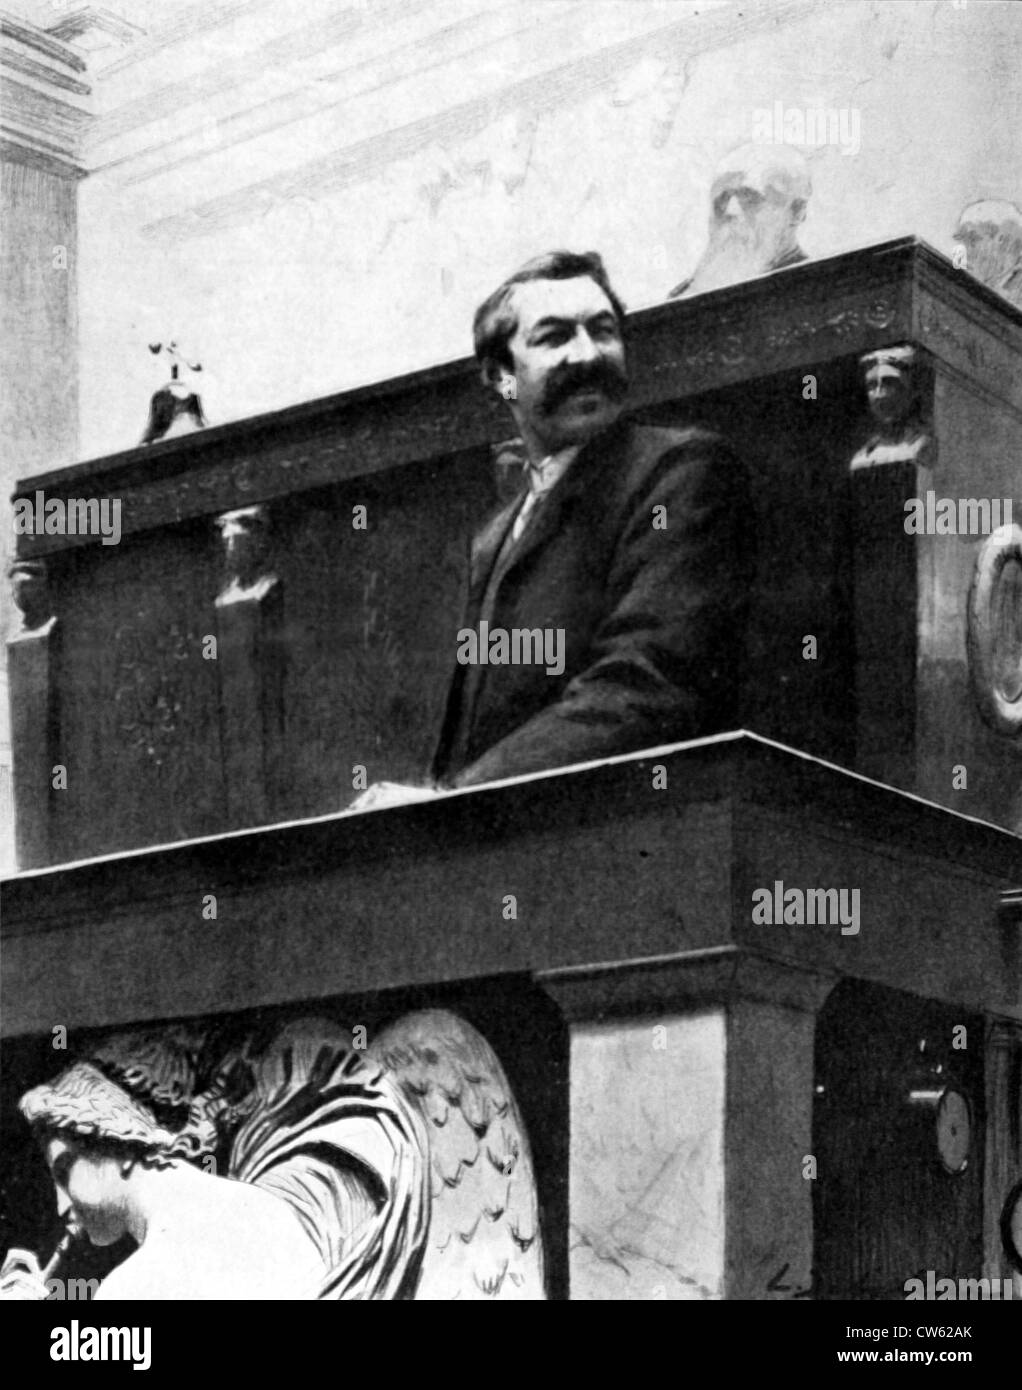 Aristide Briand at the rostrum of the Chamber, answering back to Jean Jaurès' attacks, May 13, 1907 Stock Photo